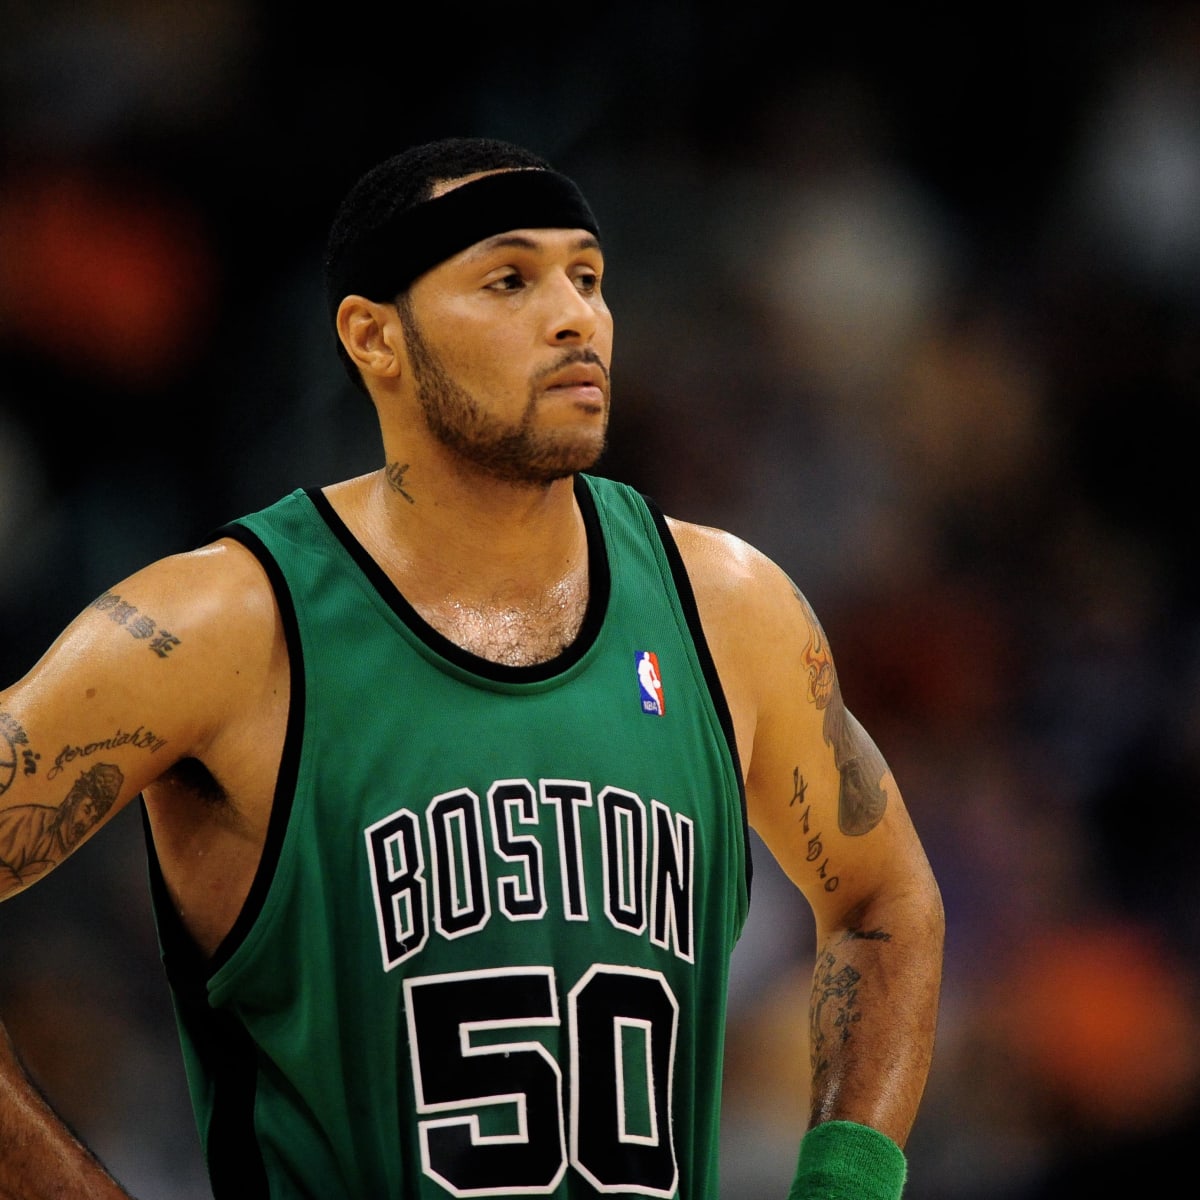 Eddie House fires back at Magic fans after Celtics analyst called out 